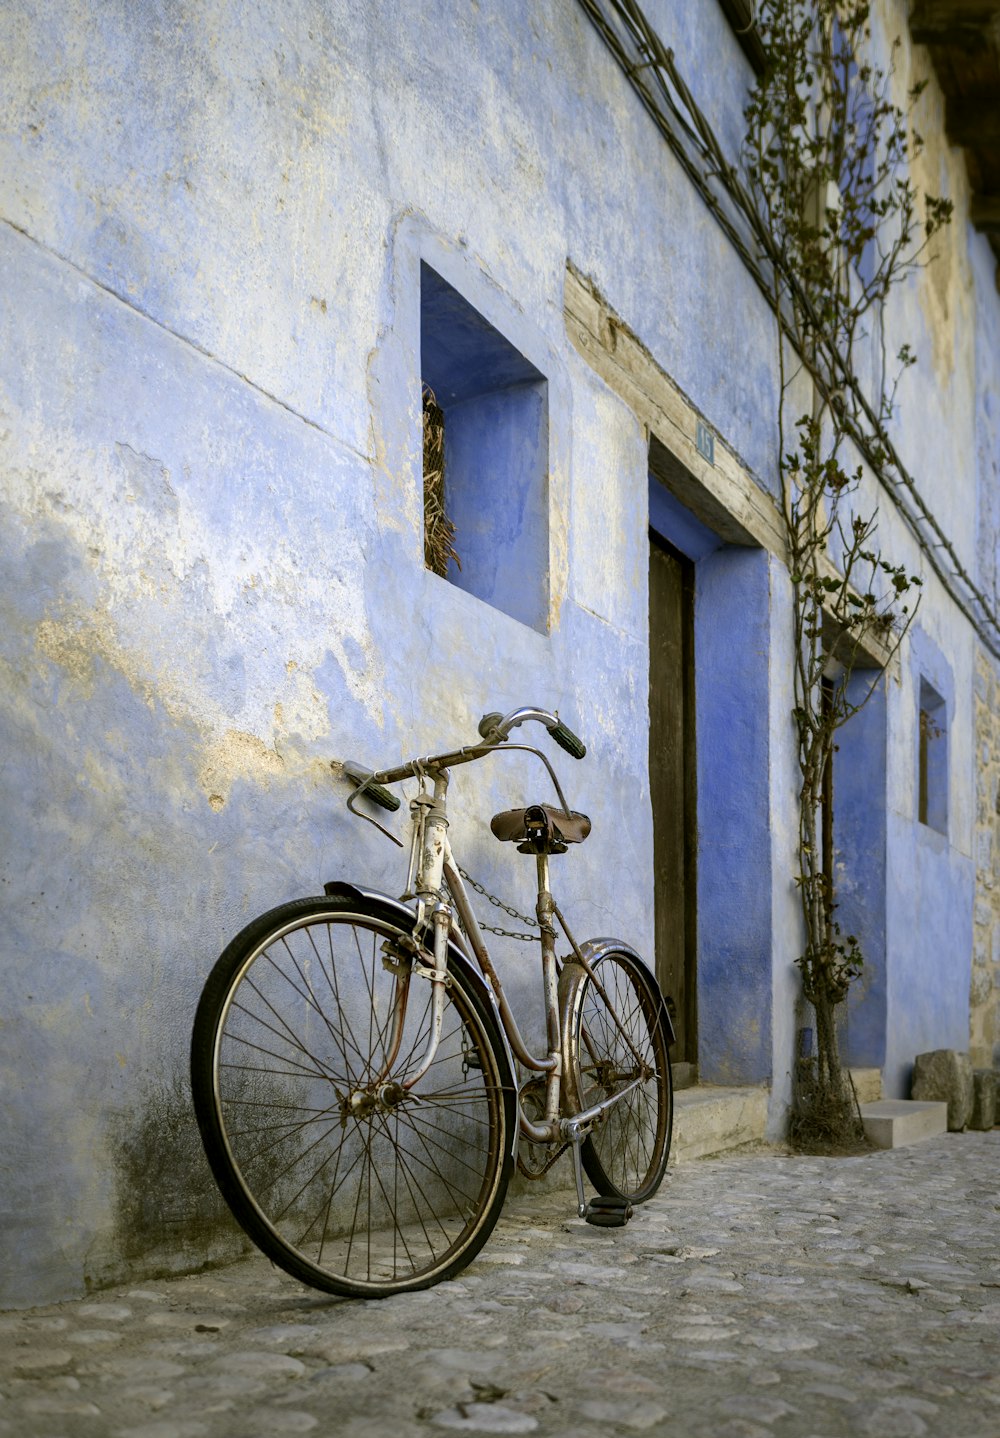 beige city bike parked and leaning on concrete wall photo – Free Bike Image  on Unsplash